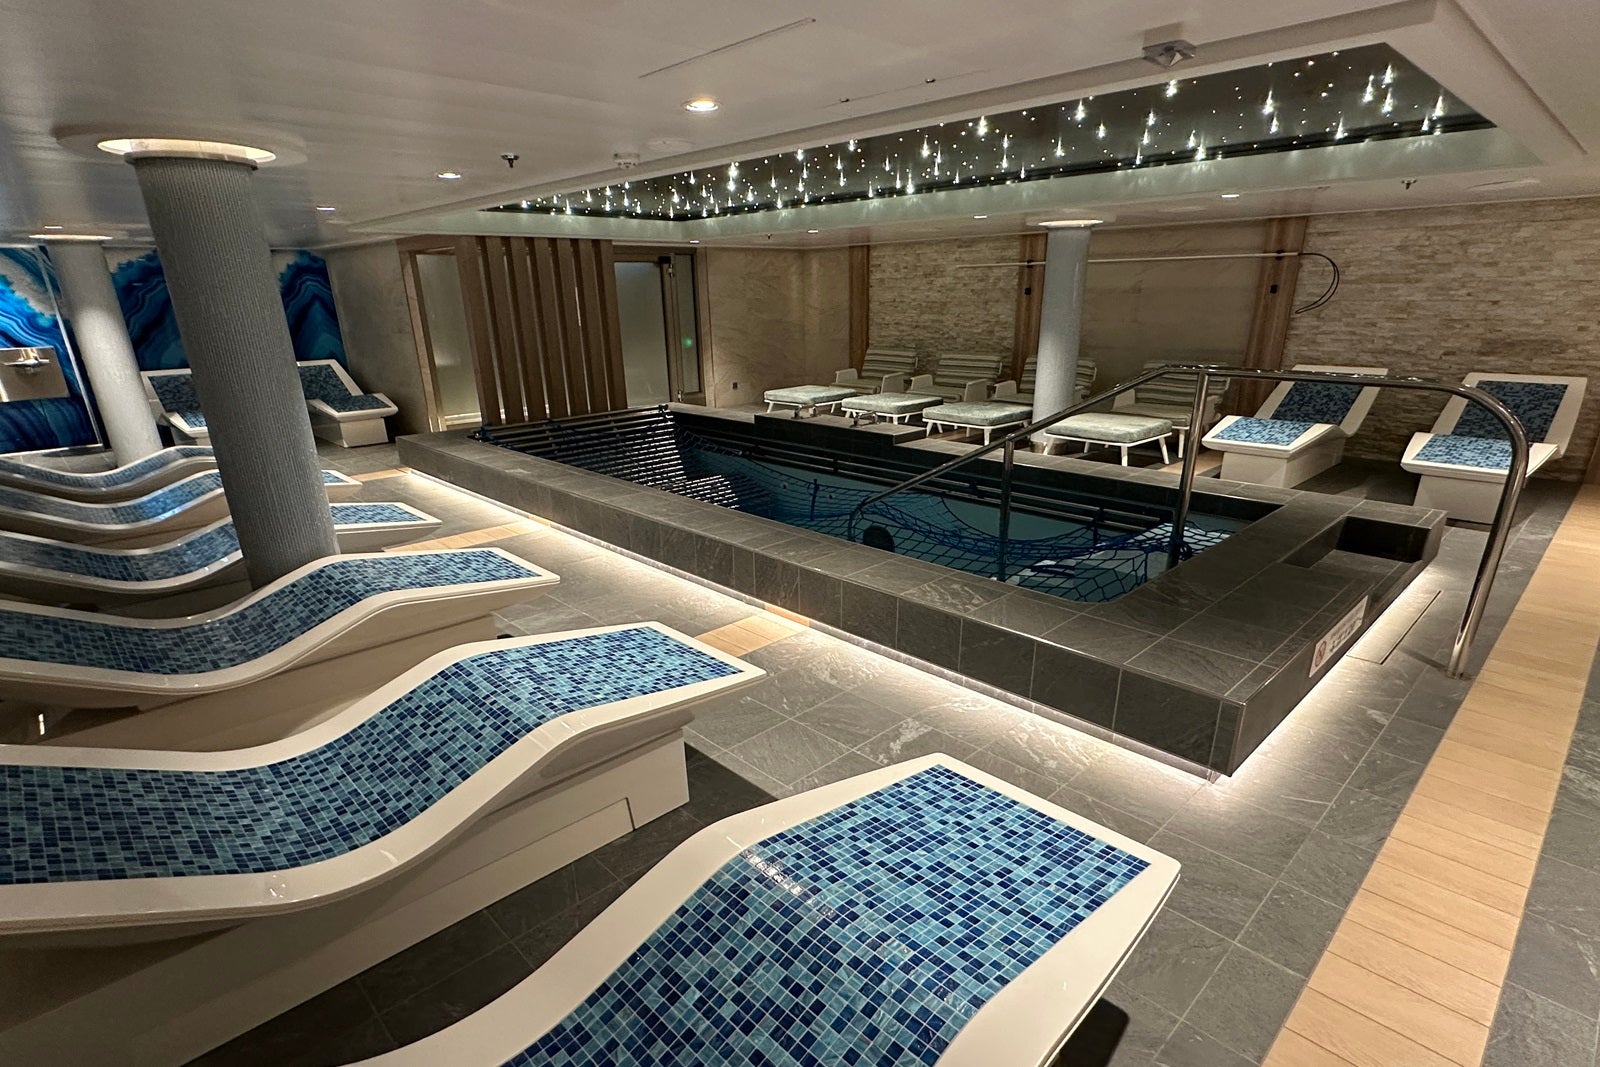 A spa thermal suite with rows of tile loungers and a central whirlpool